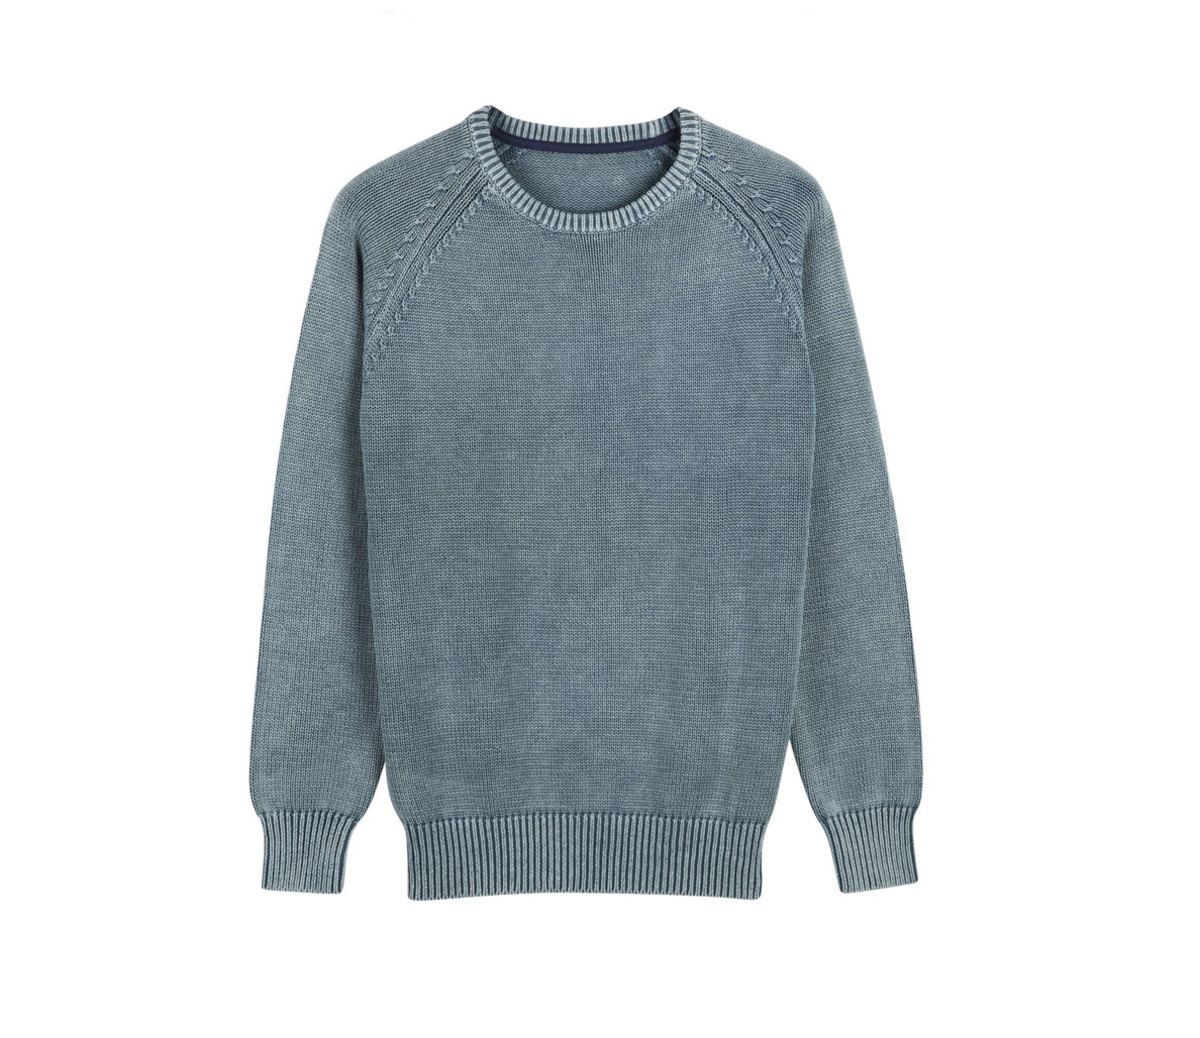 15 Lightweight Sweaters For Men in Multiple Colors and Price Points - Men's  Journal